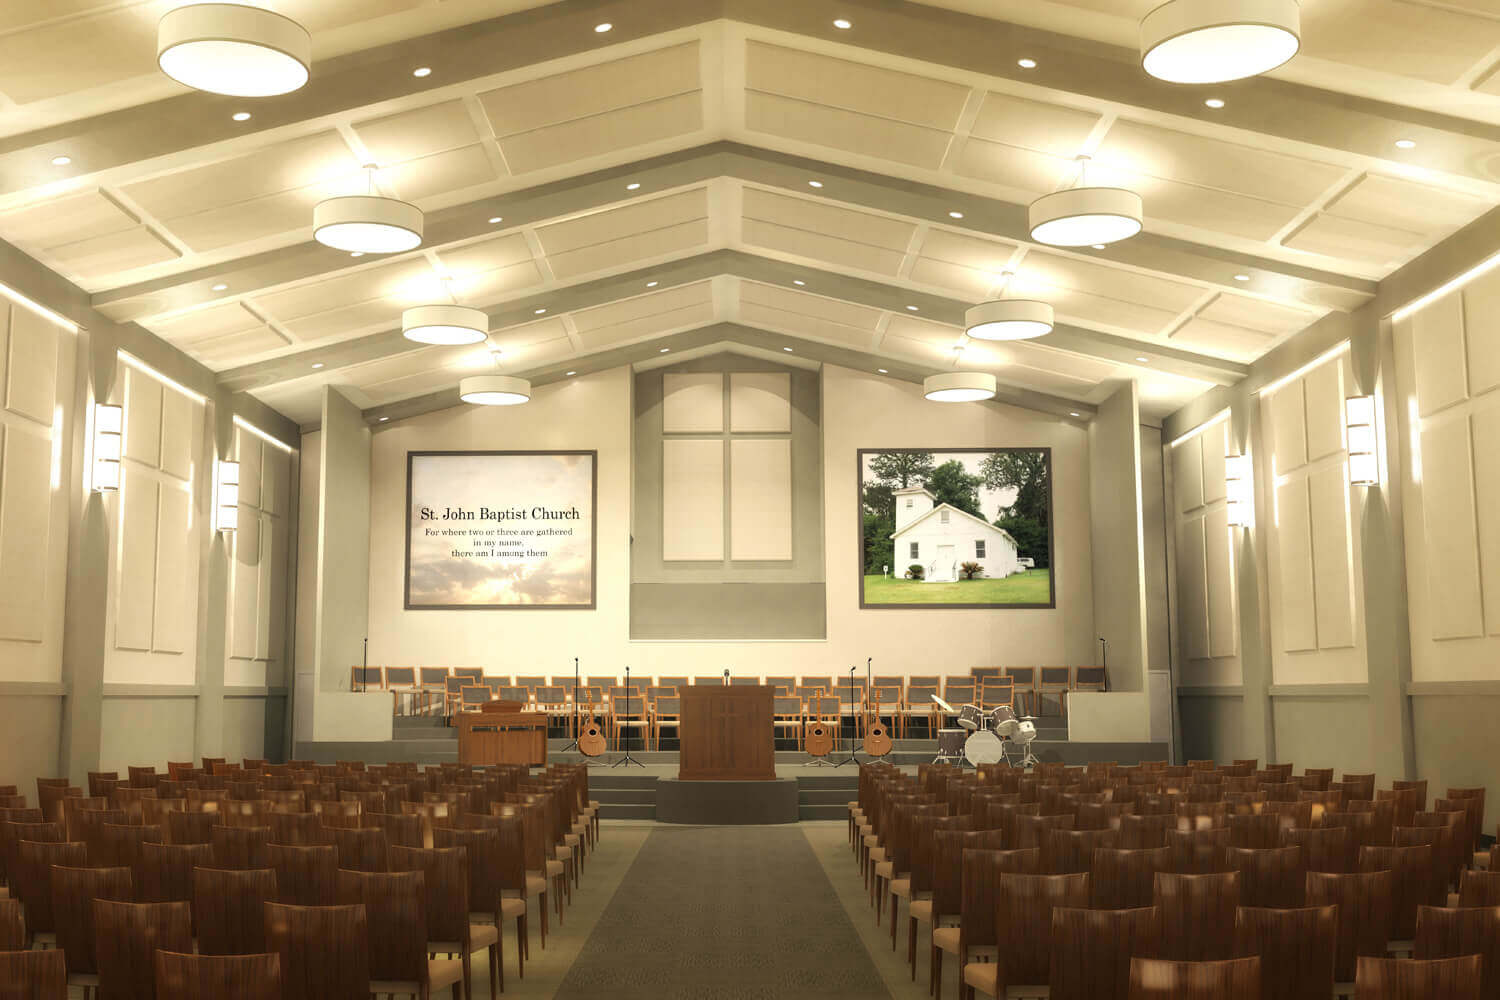 St. John Baptist Church Designed by Foshee Architecture - Artist Depiction and Rendering of the New Worship Hall and Sanctuary